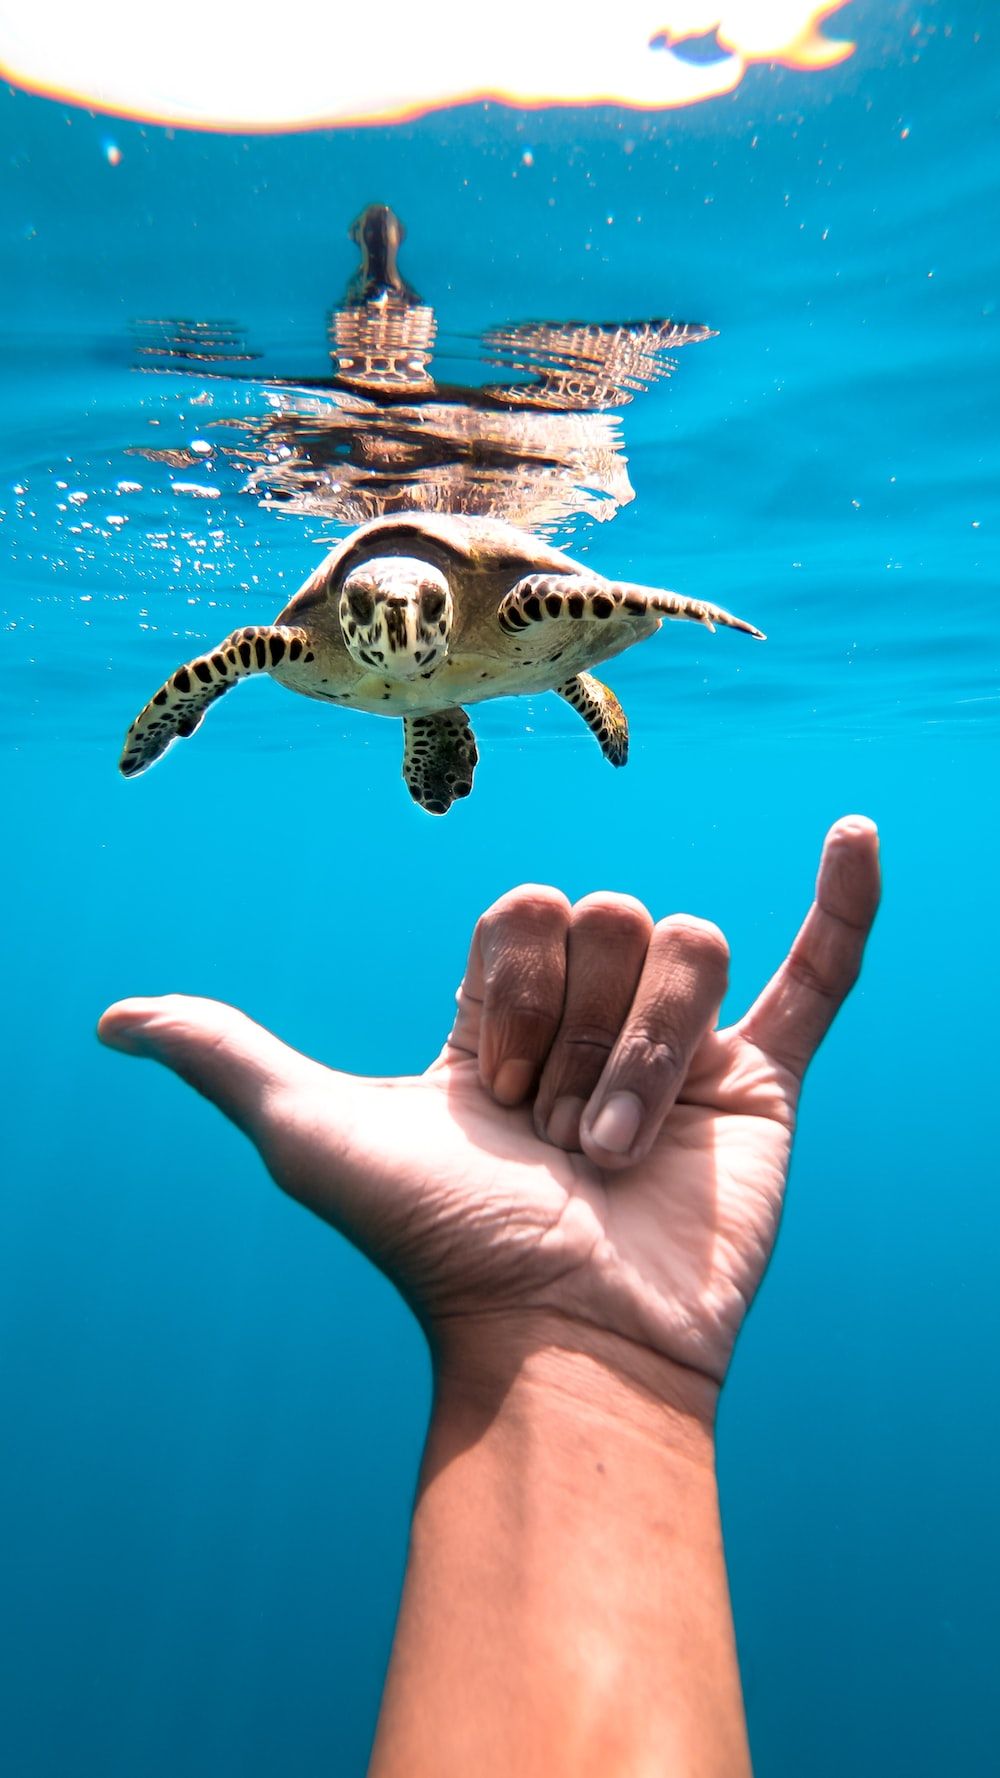 A sea turtle swimming in the ocean with a person's hand outstretched in front of it. - Sea turtle